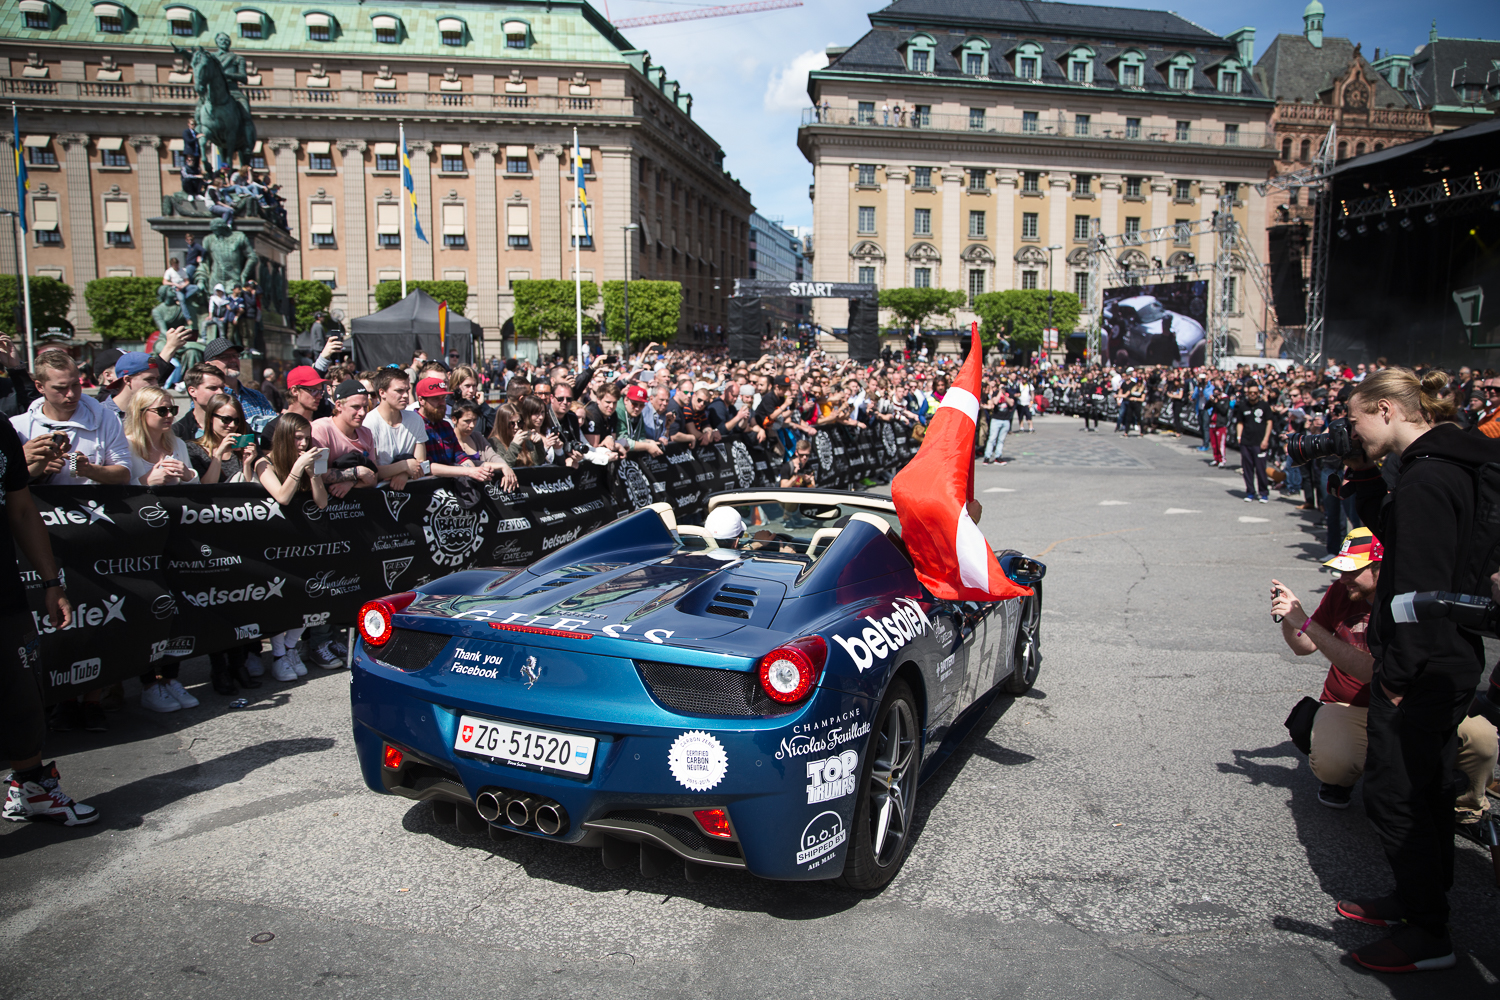 SMoores_15-05-24_Gumball 3000 Day 1_0513-Edit.jpg